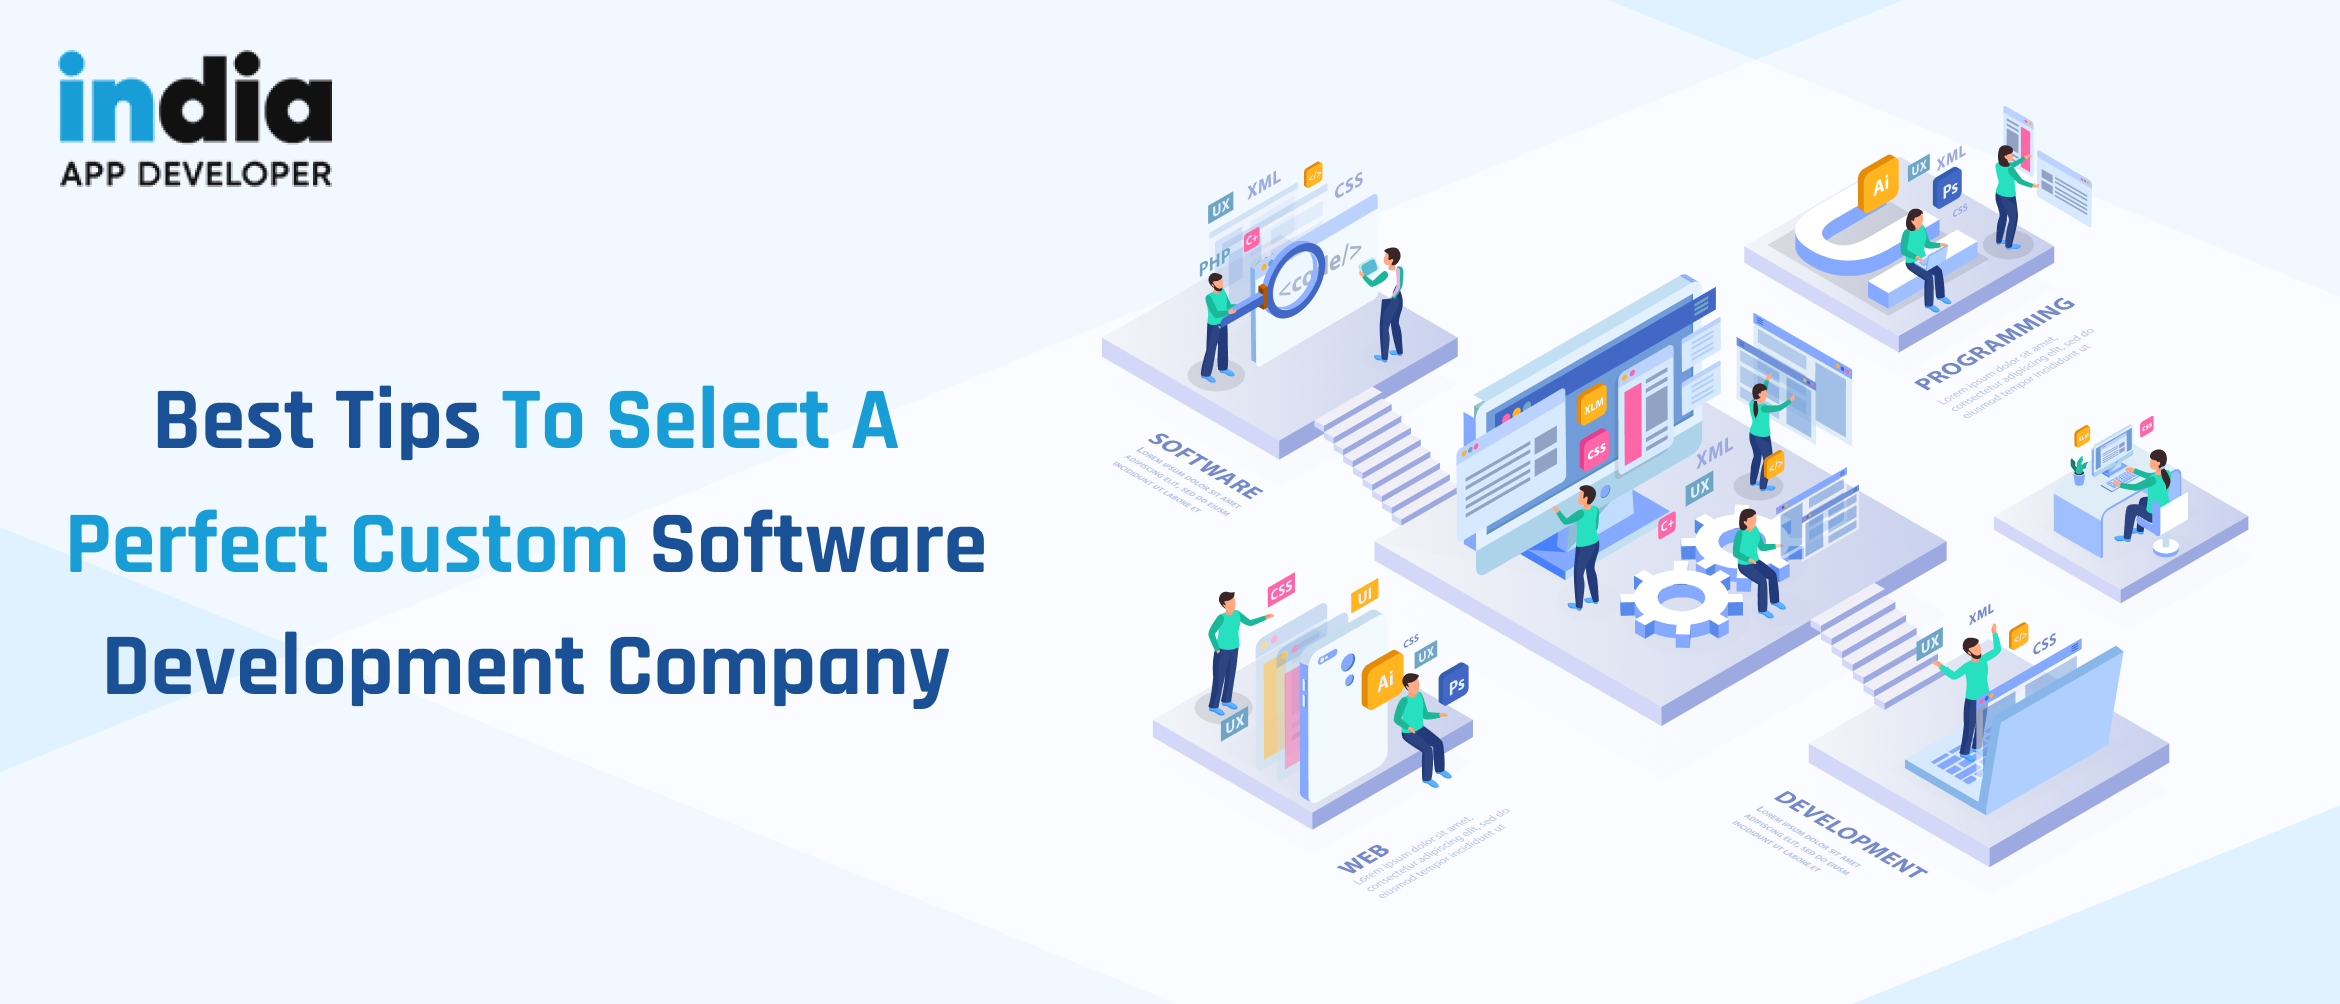 Best Tips to Select a Perfect Custom Software Development Company